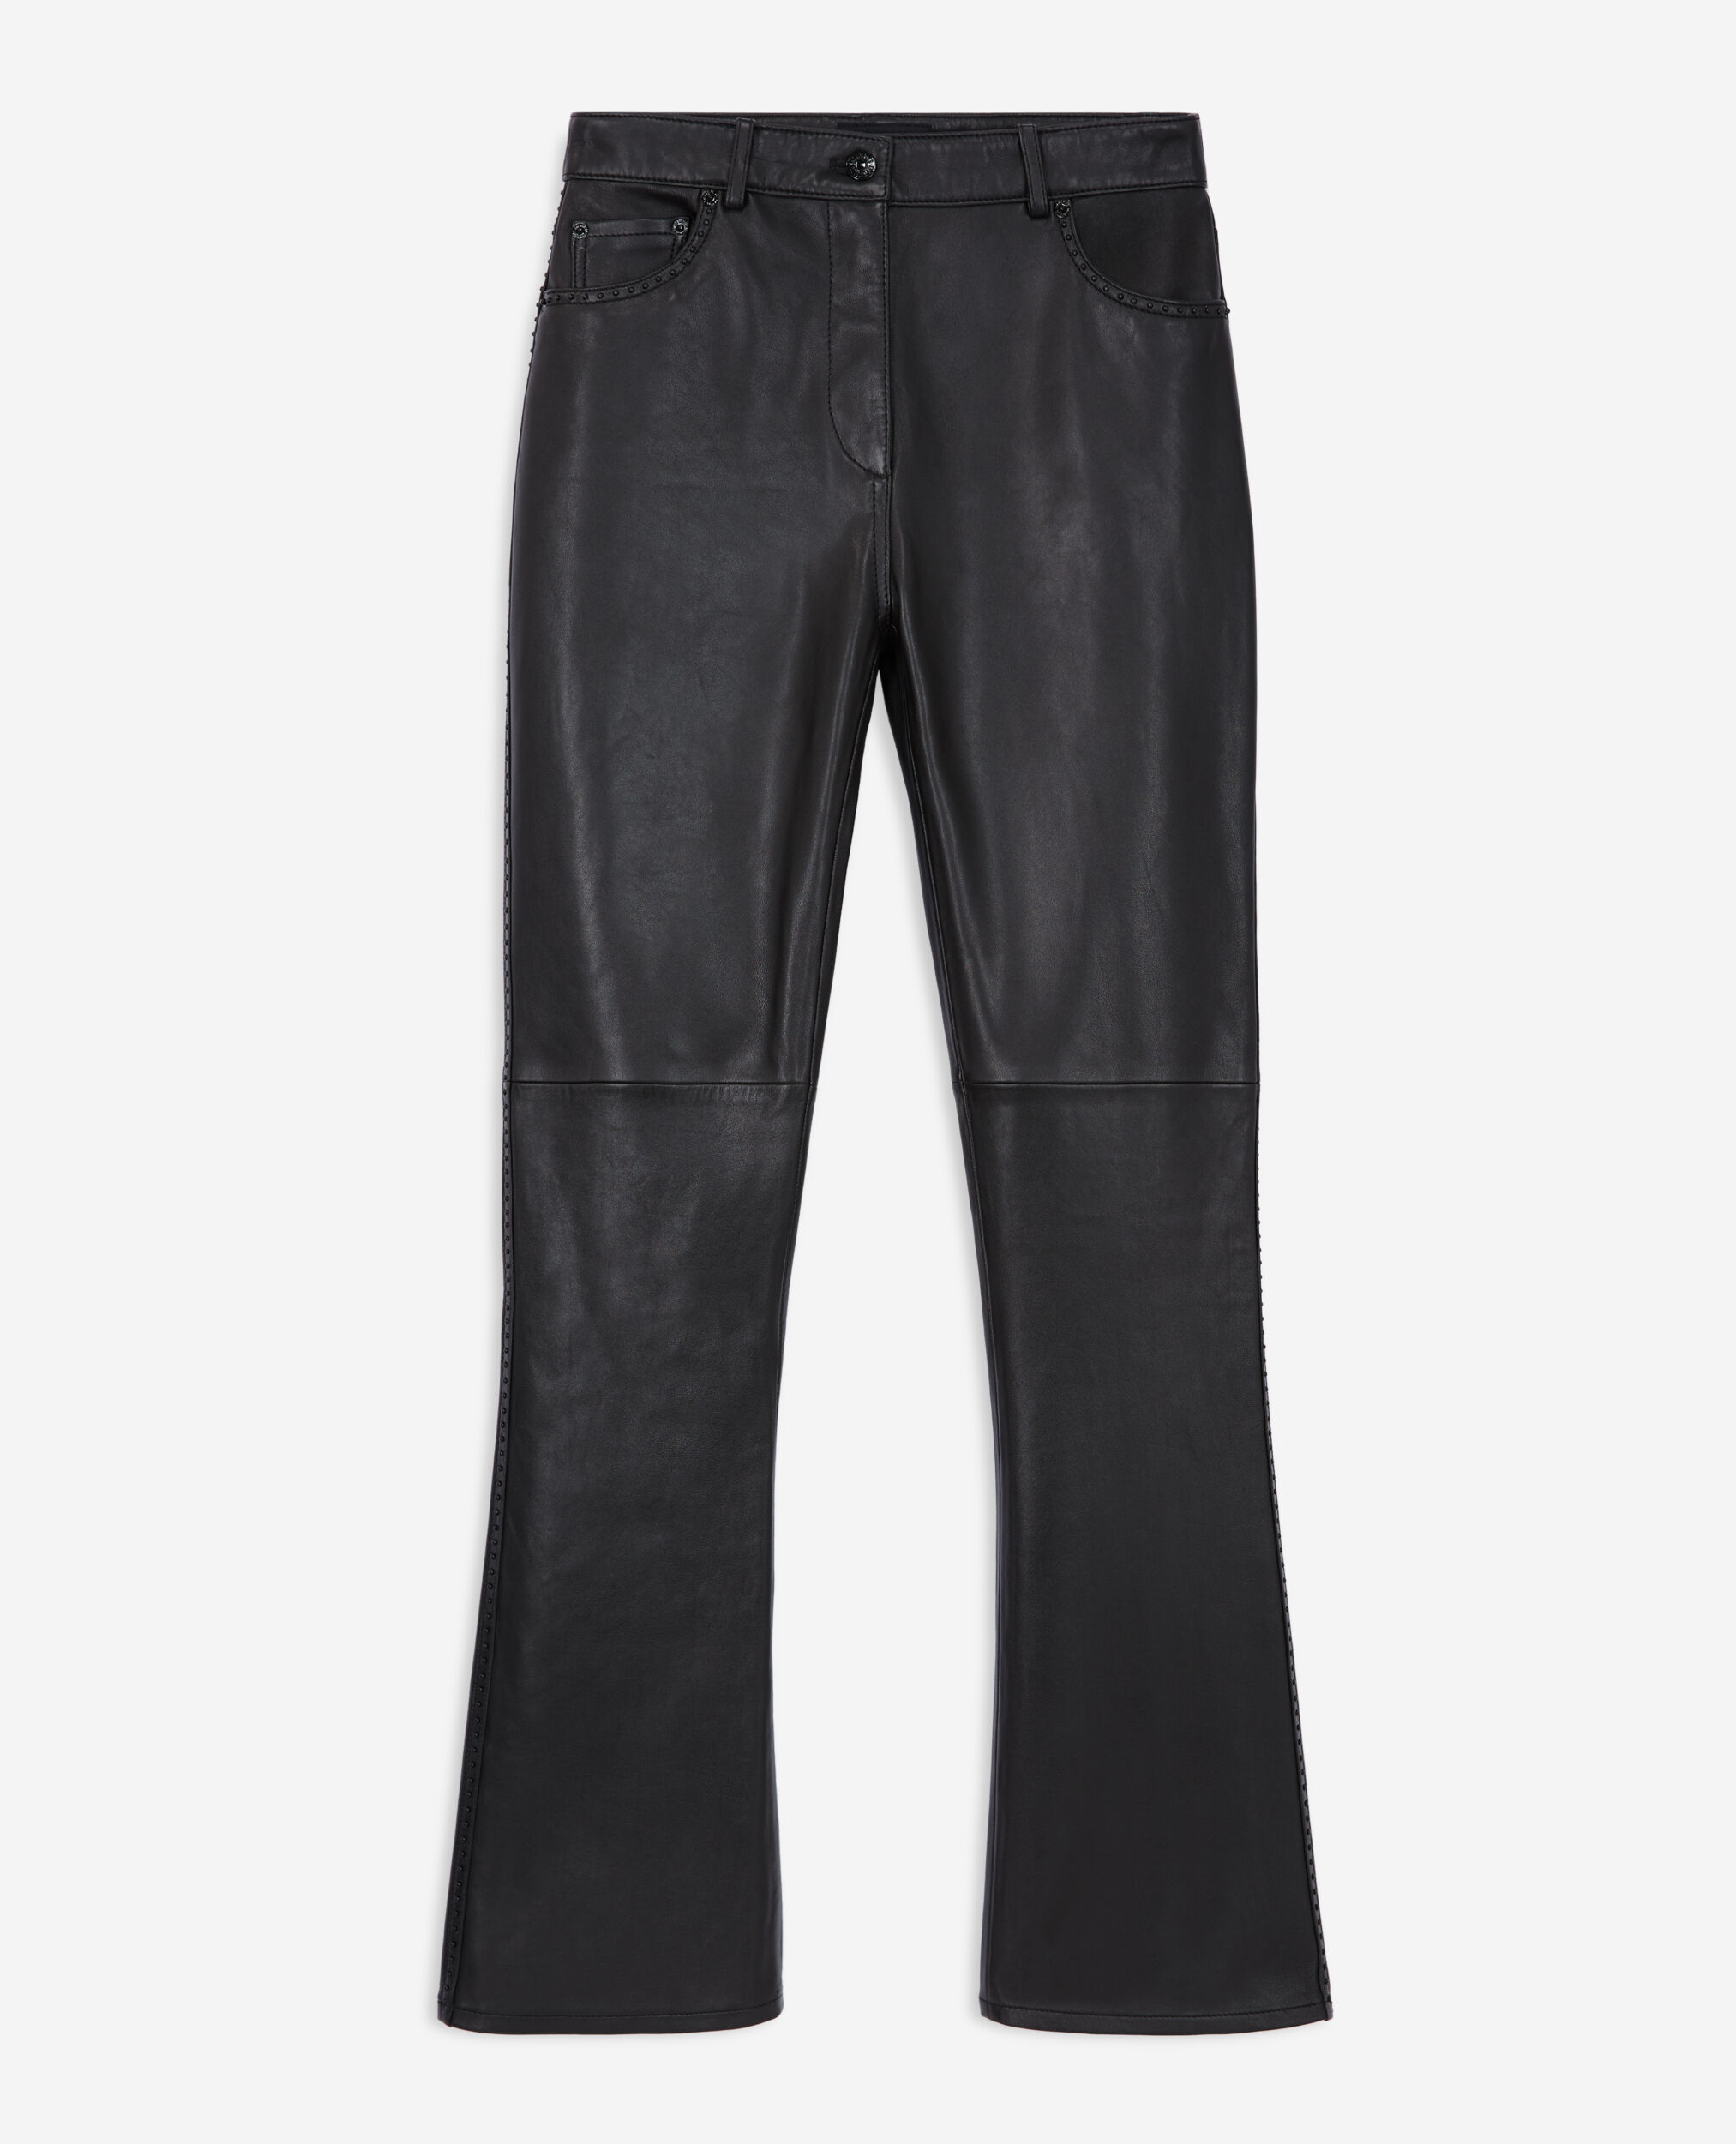 Black leather pants with studs | The Kooples - US